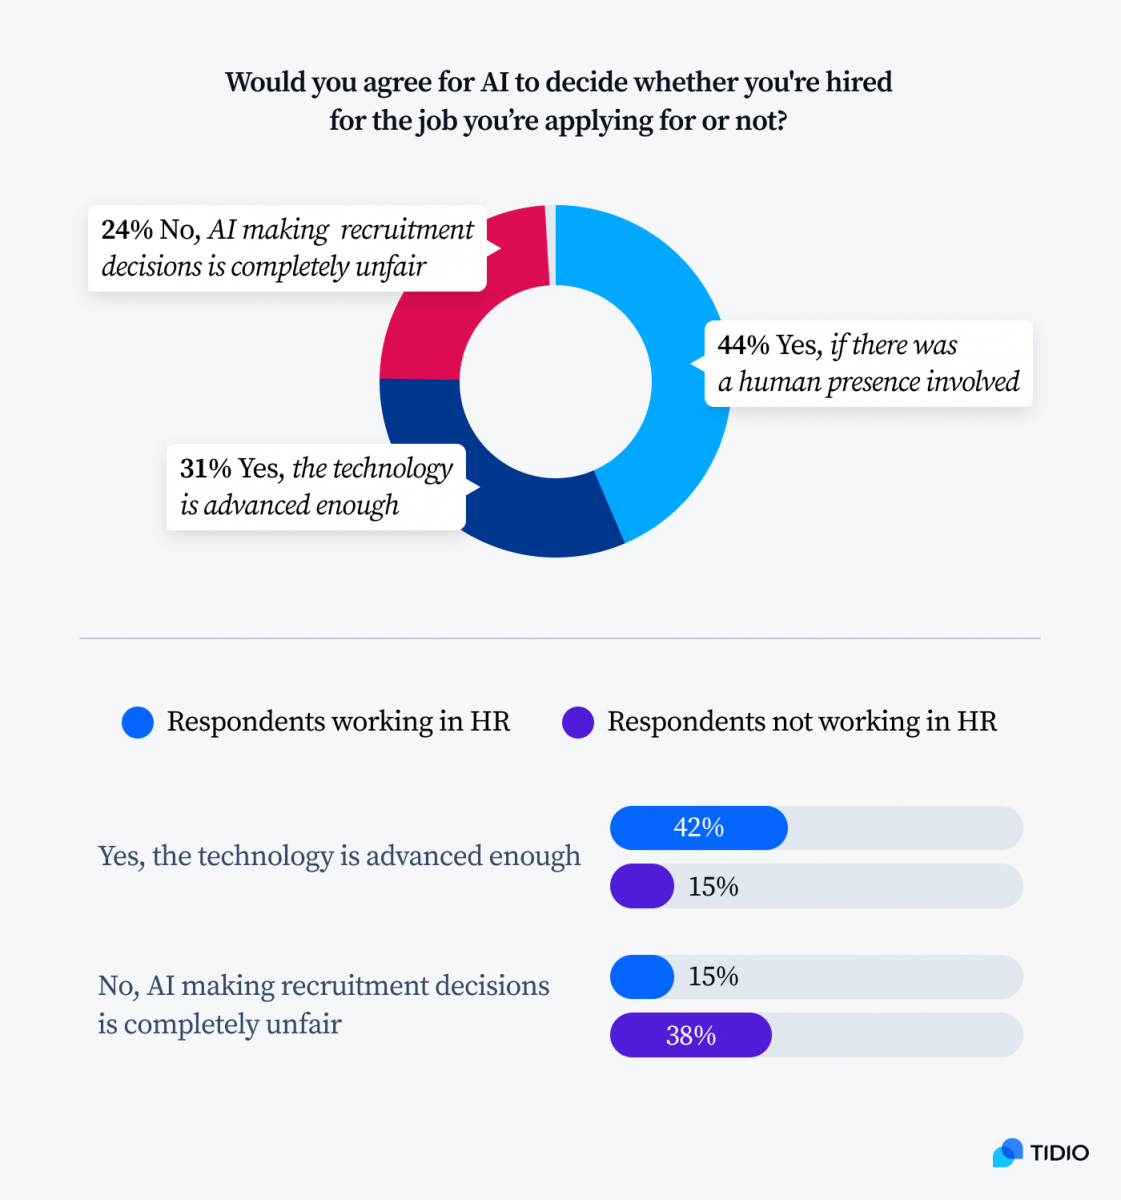 Infographic titled: Would you agree for AI to decide whether you're hired for the job you're applying for or not?